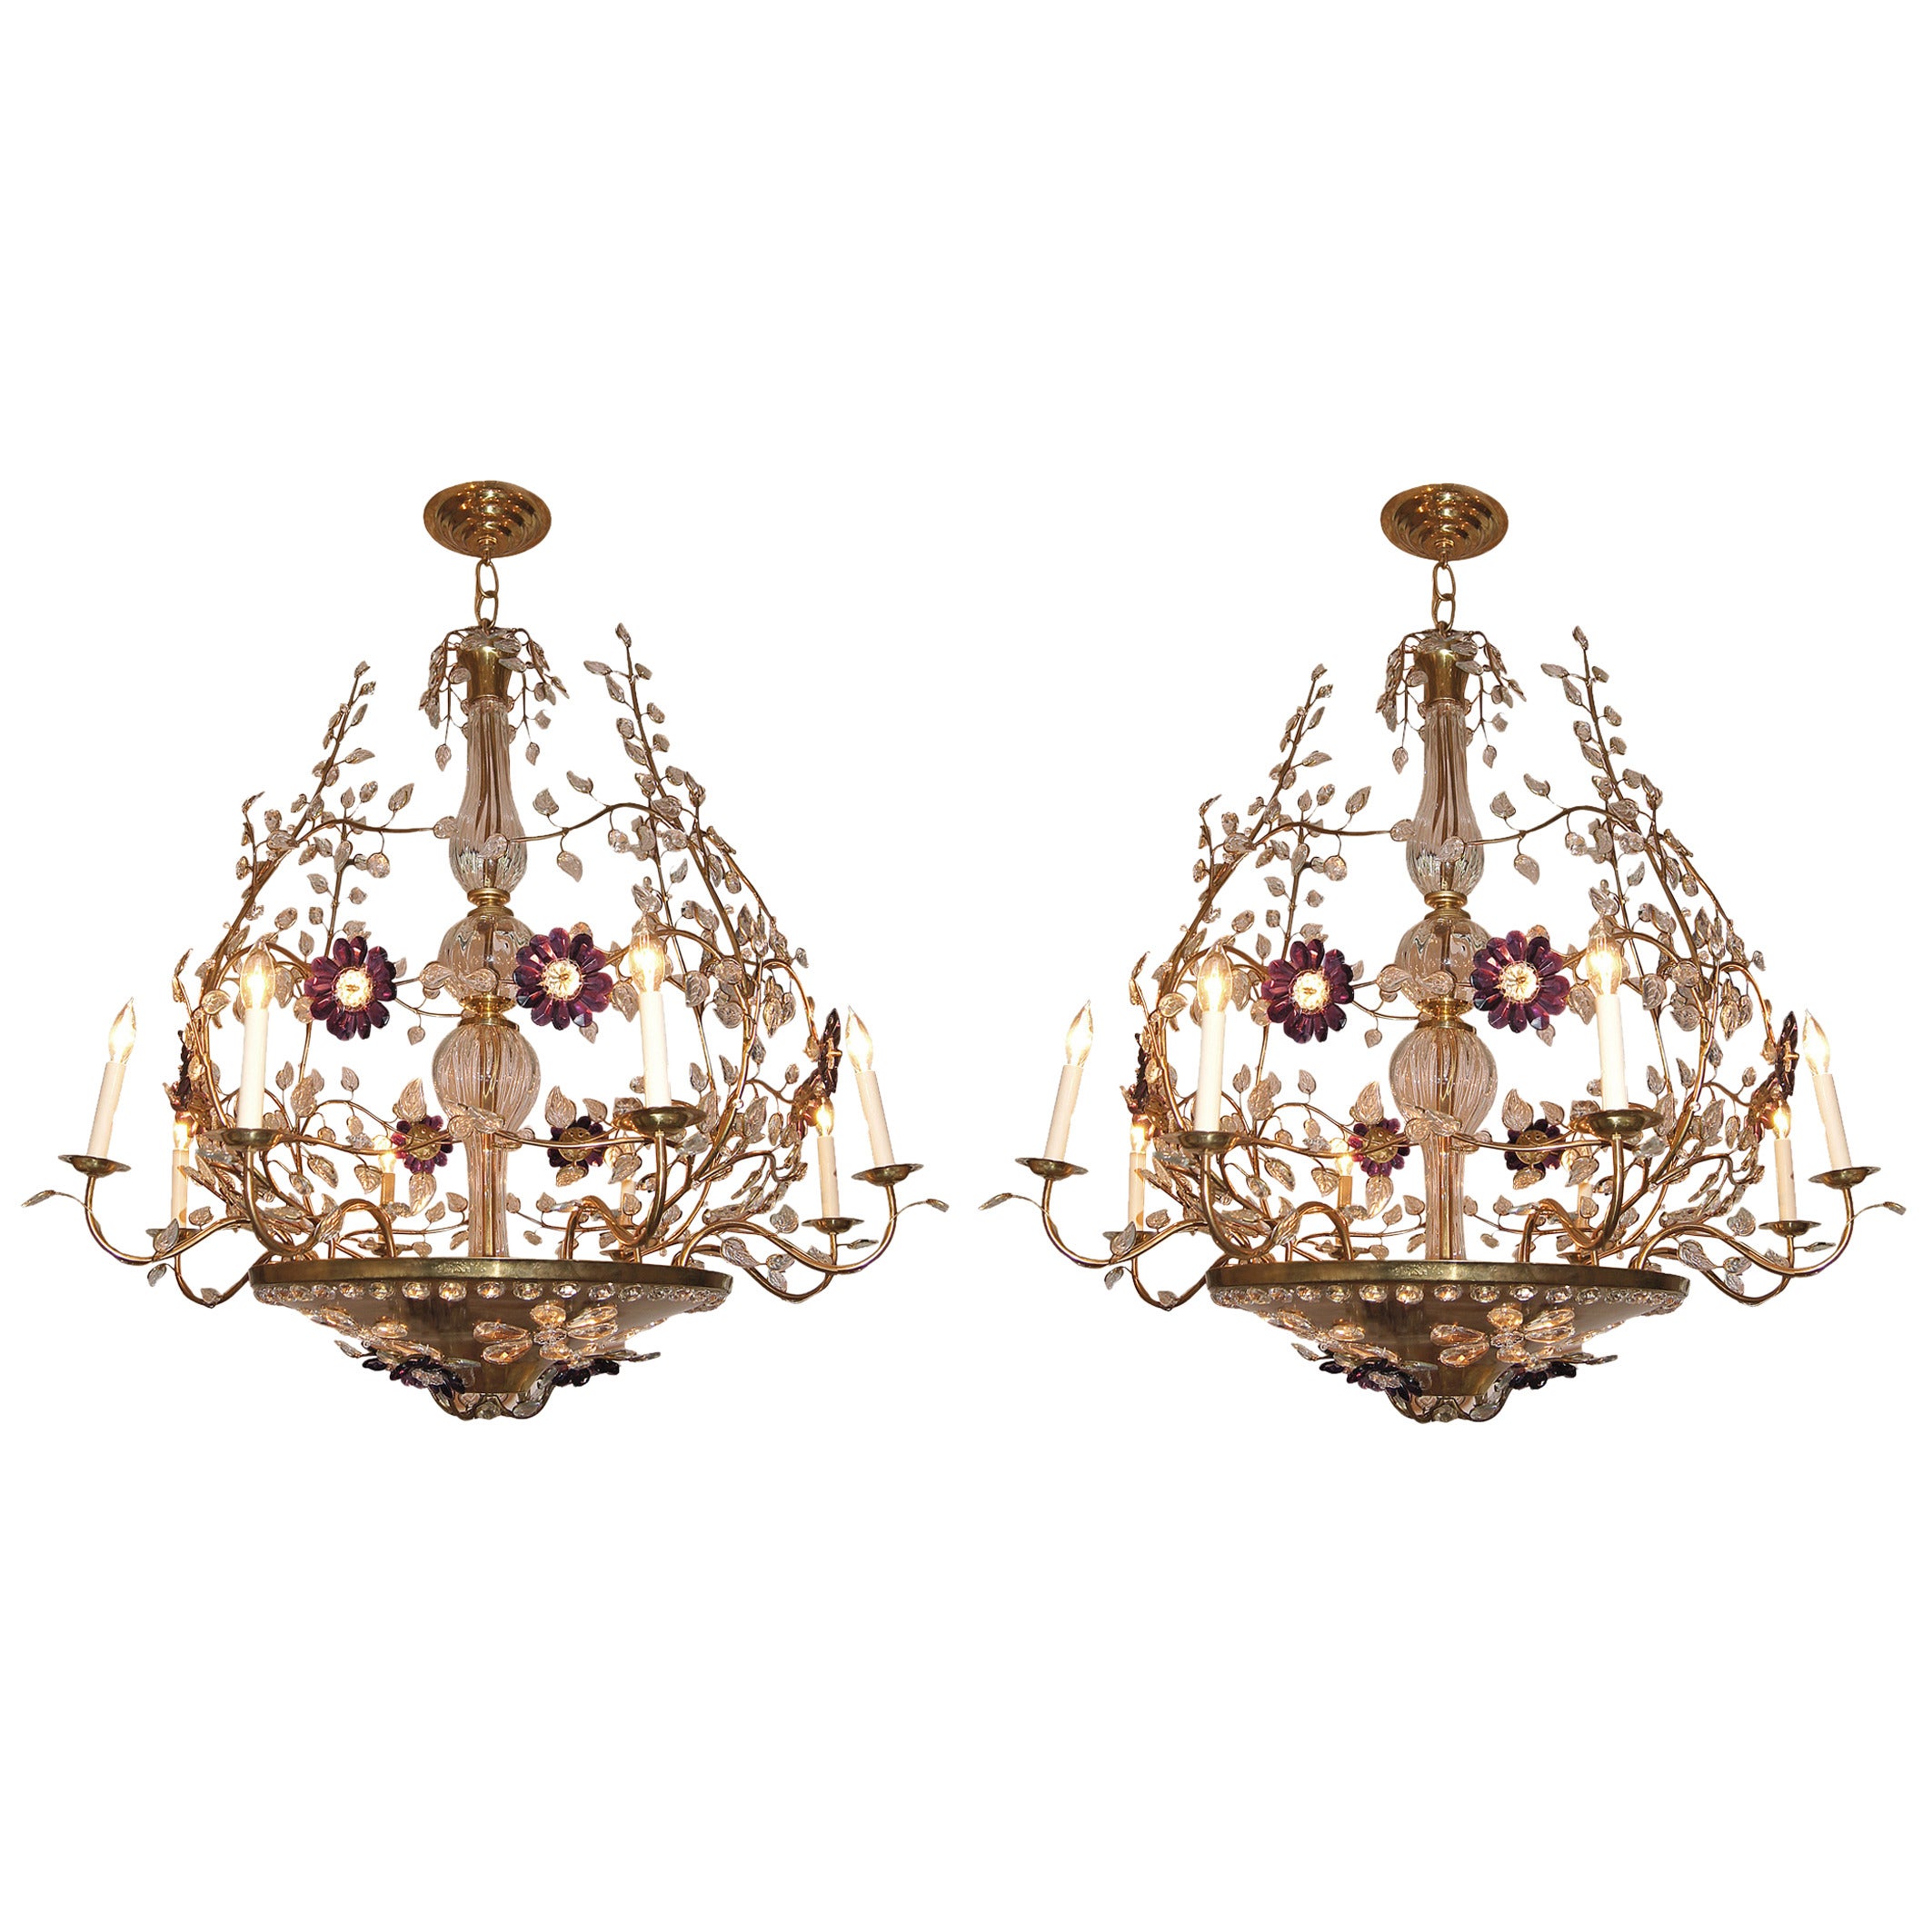 Pair of Large Gilt Chandeliers with Amethyst Flowers